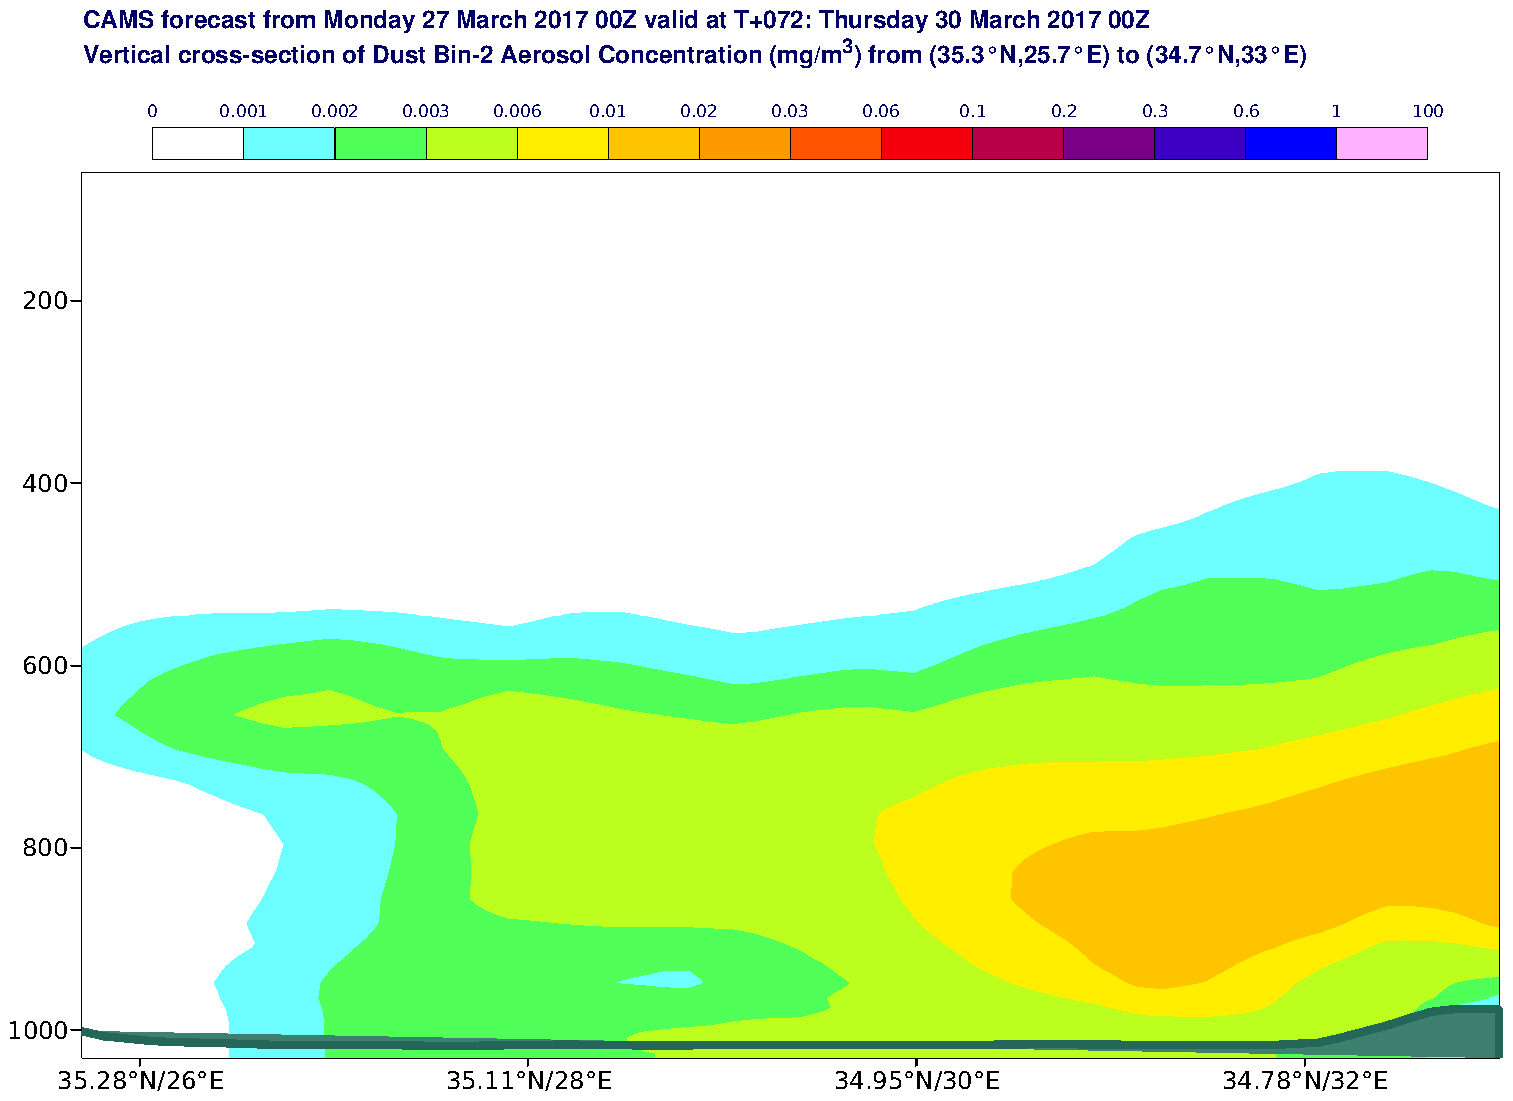 Vertical cross-section of Dust Bin-2 Aerosol Concentration (mg/m3) valid at T72 - 2017-03-30 00:00